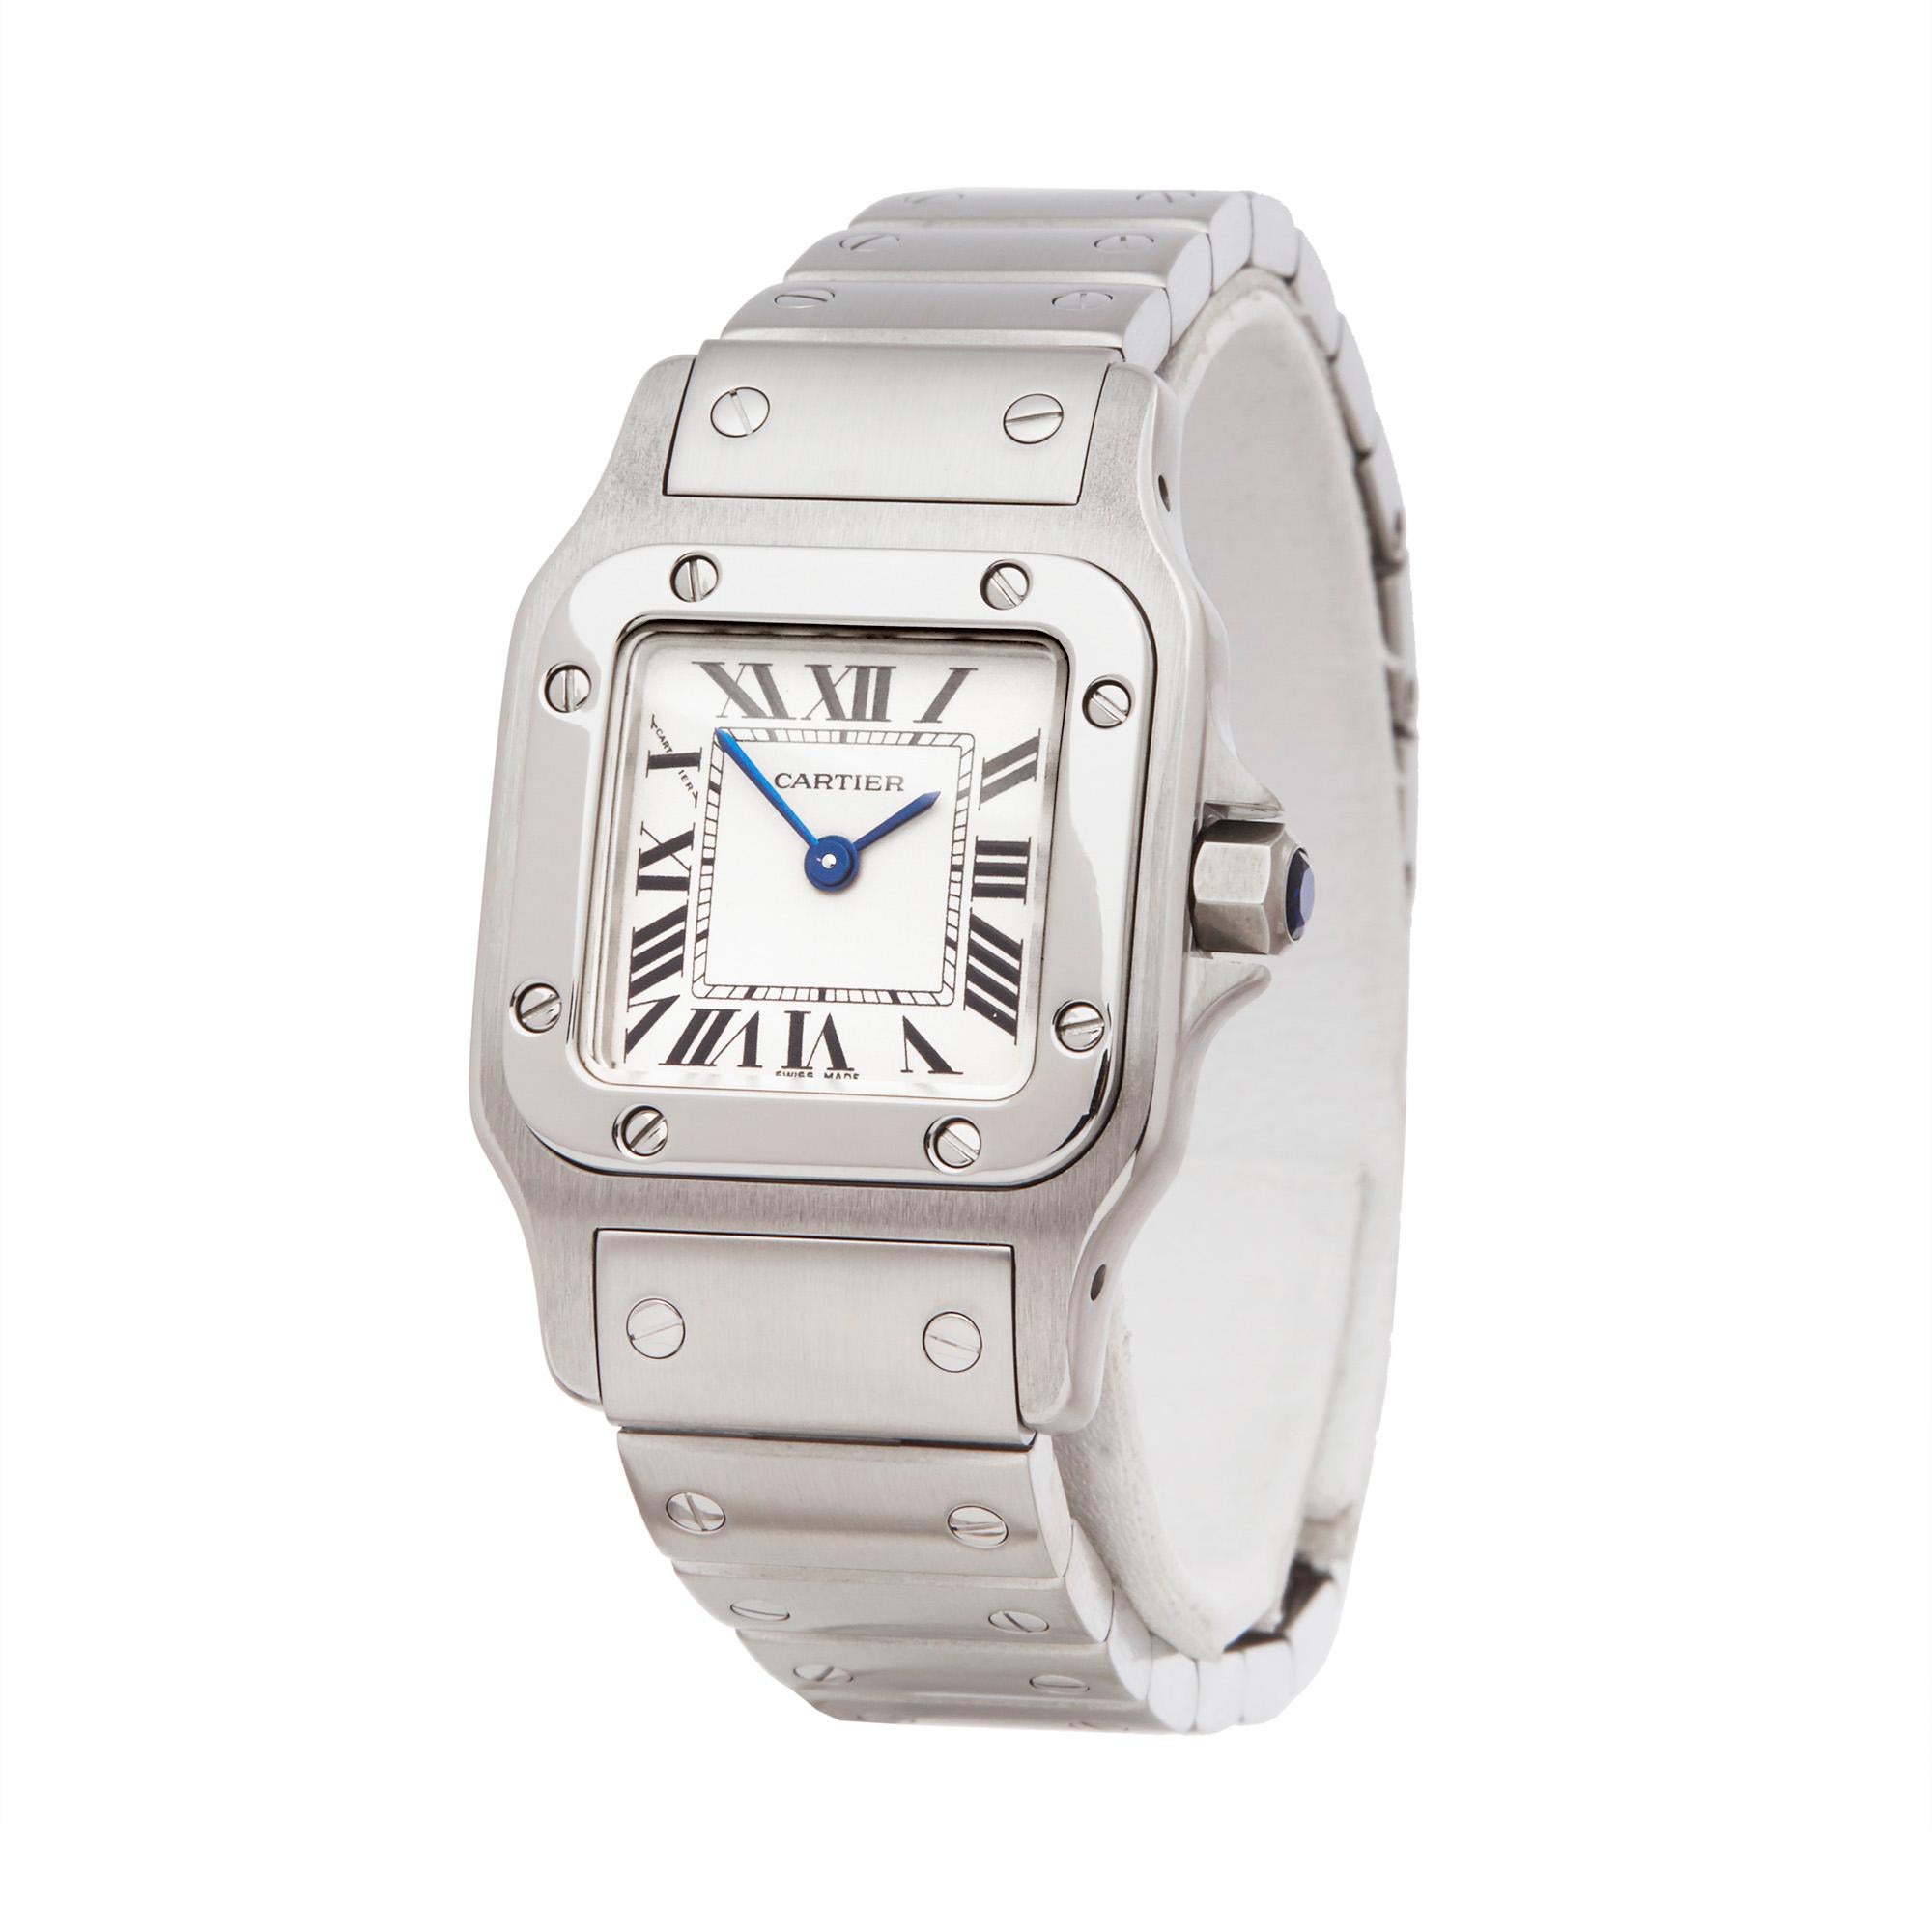 Reference: W5710
Manufacturer: Cartier
Model: Santos Galbee
Model Reference: 1565
Age: Circa 1990's
Gender: Women's
Box and Papers: Presentation Box
Dial: White Roman
Glass: Sapphire Crystal
Movement: Quartz
Water Resistance: To Manufacturers